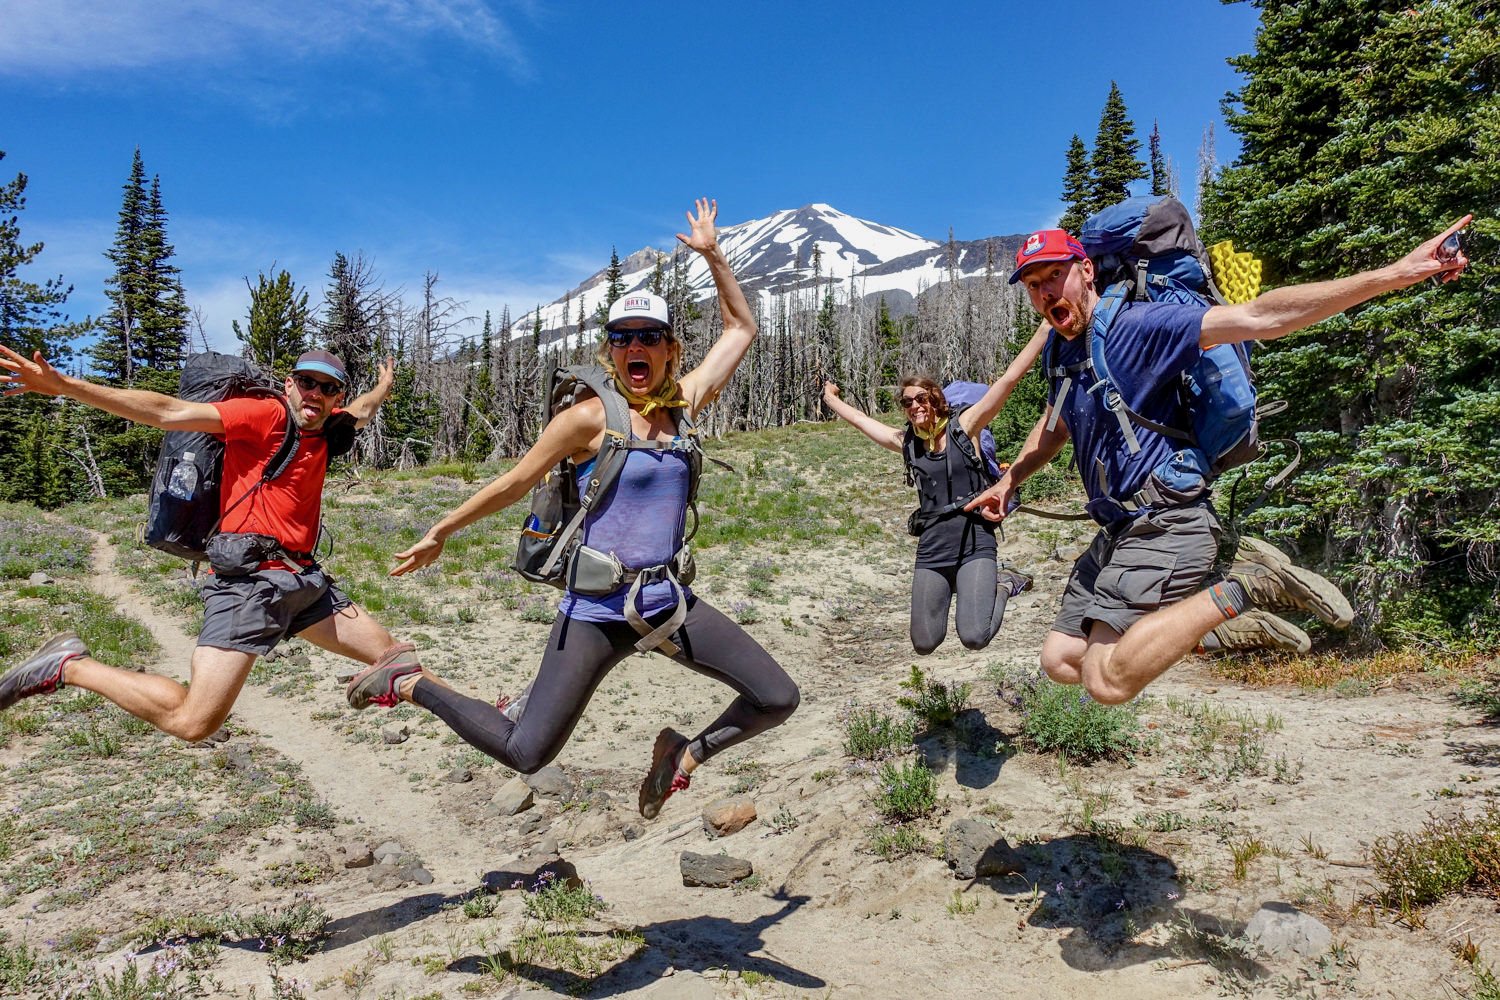 Four hikers having fun jumping high in the air above a trail with a mountain in the background